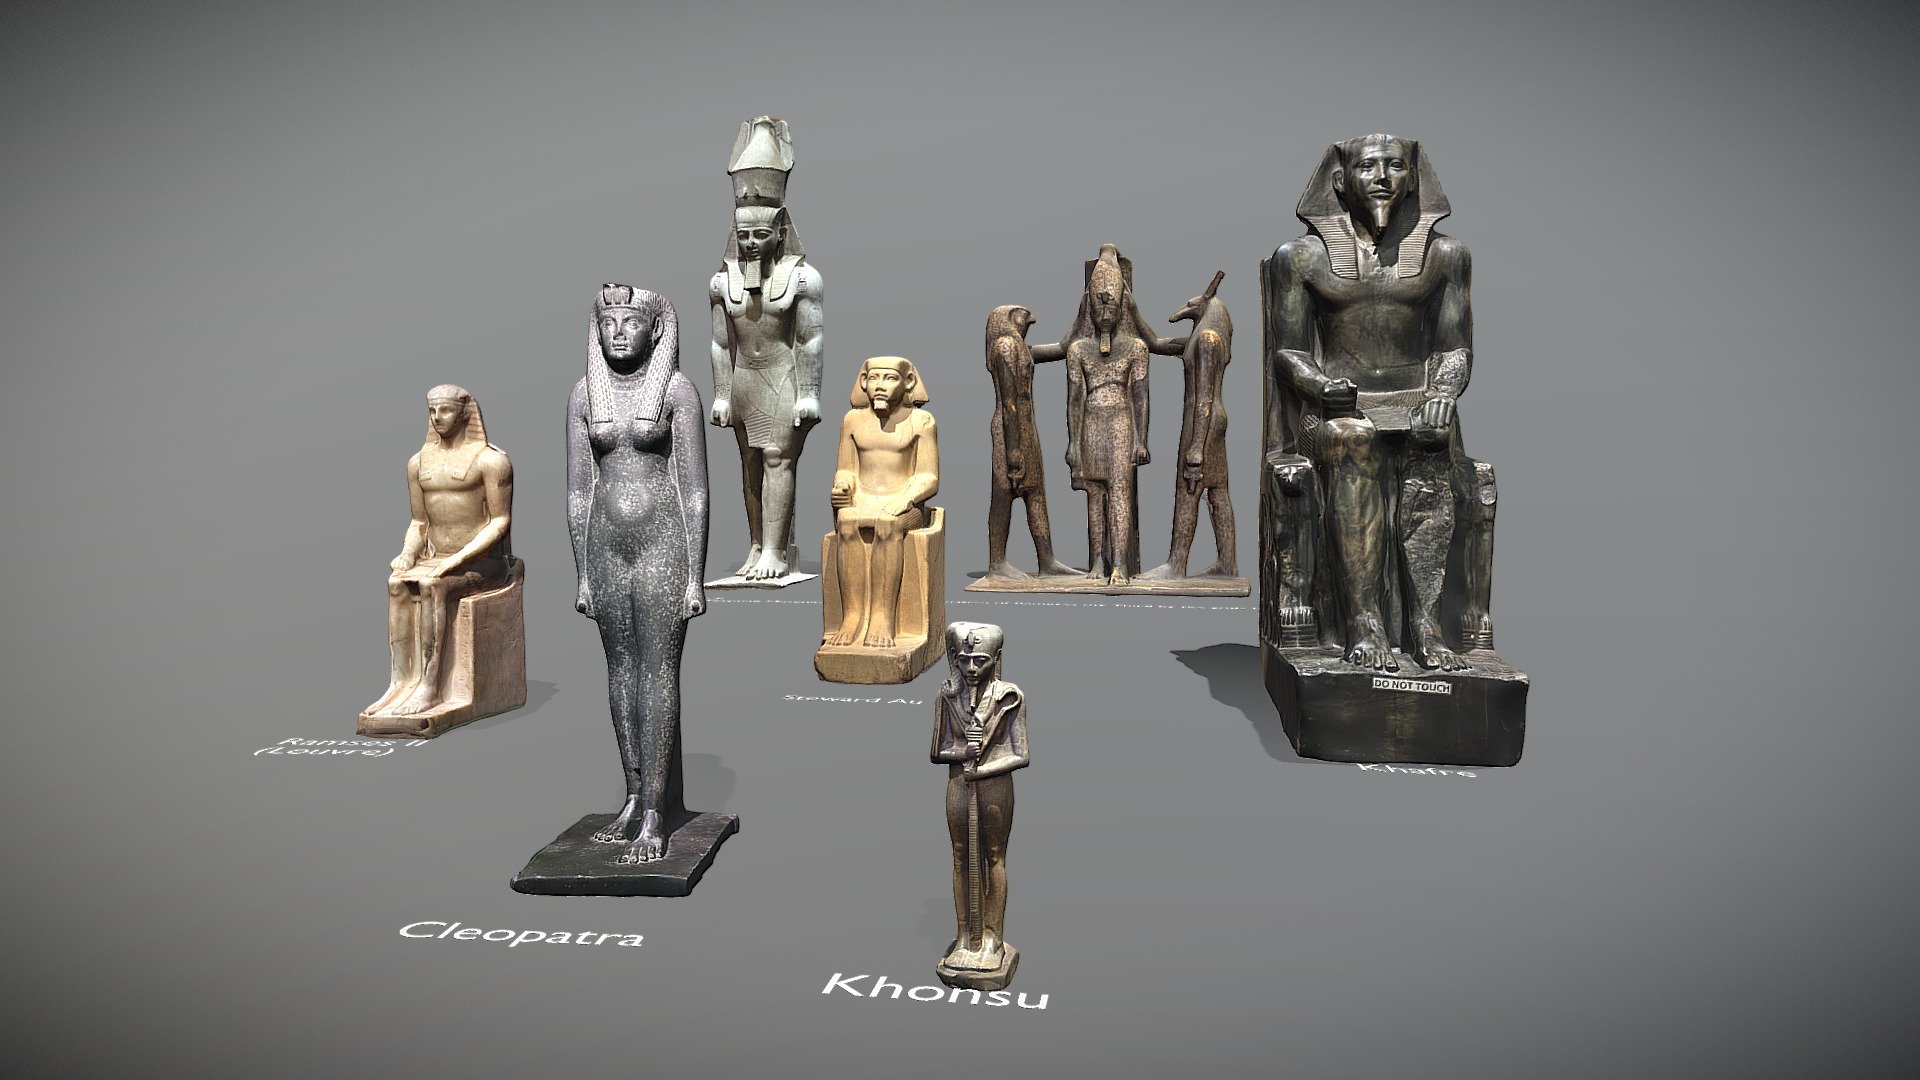 This collection contains several real-life artifacts, scanned at various locations around the world  (Museums or Temples) 

Optimized for game engines while keeping photorealistic visuall quality

Retopology and texture bake in Blender (2k, Diffuse only)

•   Statue of Ramses III Coronation (from Hathor Temple) – Egyptian Museum Cairo

•   Statue of Ramses II – Grand Egyptian Museum

•   Statue of King Khafre – Egyptian Museum Cairo

•   Statue of Ramses II – Louvre Museum

•   Statue of Khensu (moon god) – Egyptian Museum Cairo

•   Statue of Steward Au – The Metropolitan Museum of Art

•   Statue of Cleopatra – Rosicrucian Egyptian Museum - Ancient Egypt Pack - Download Free 3D model by suspishus 3d model